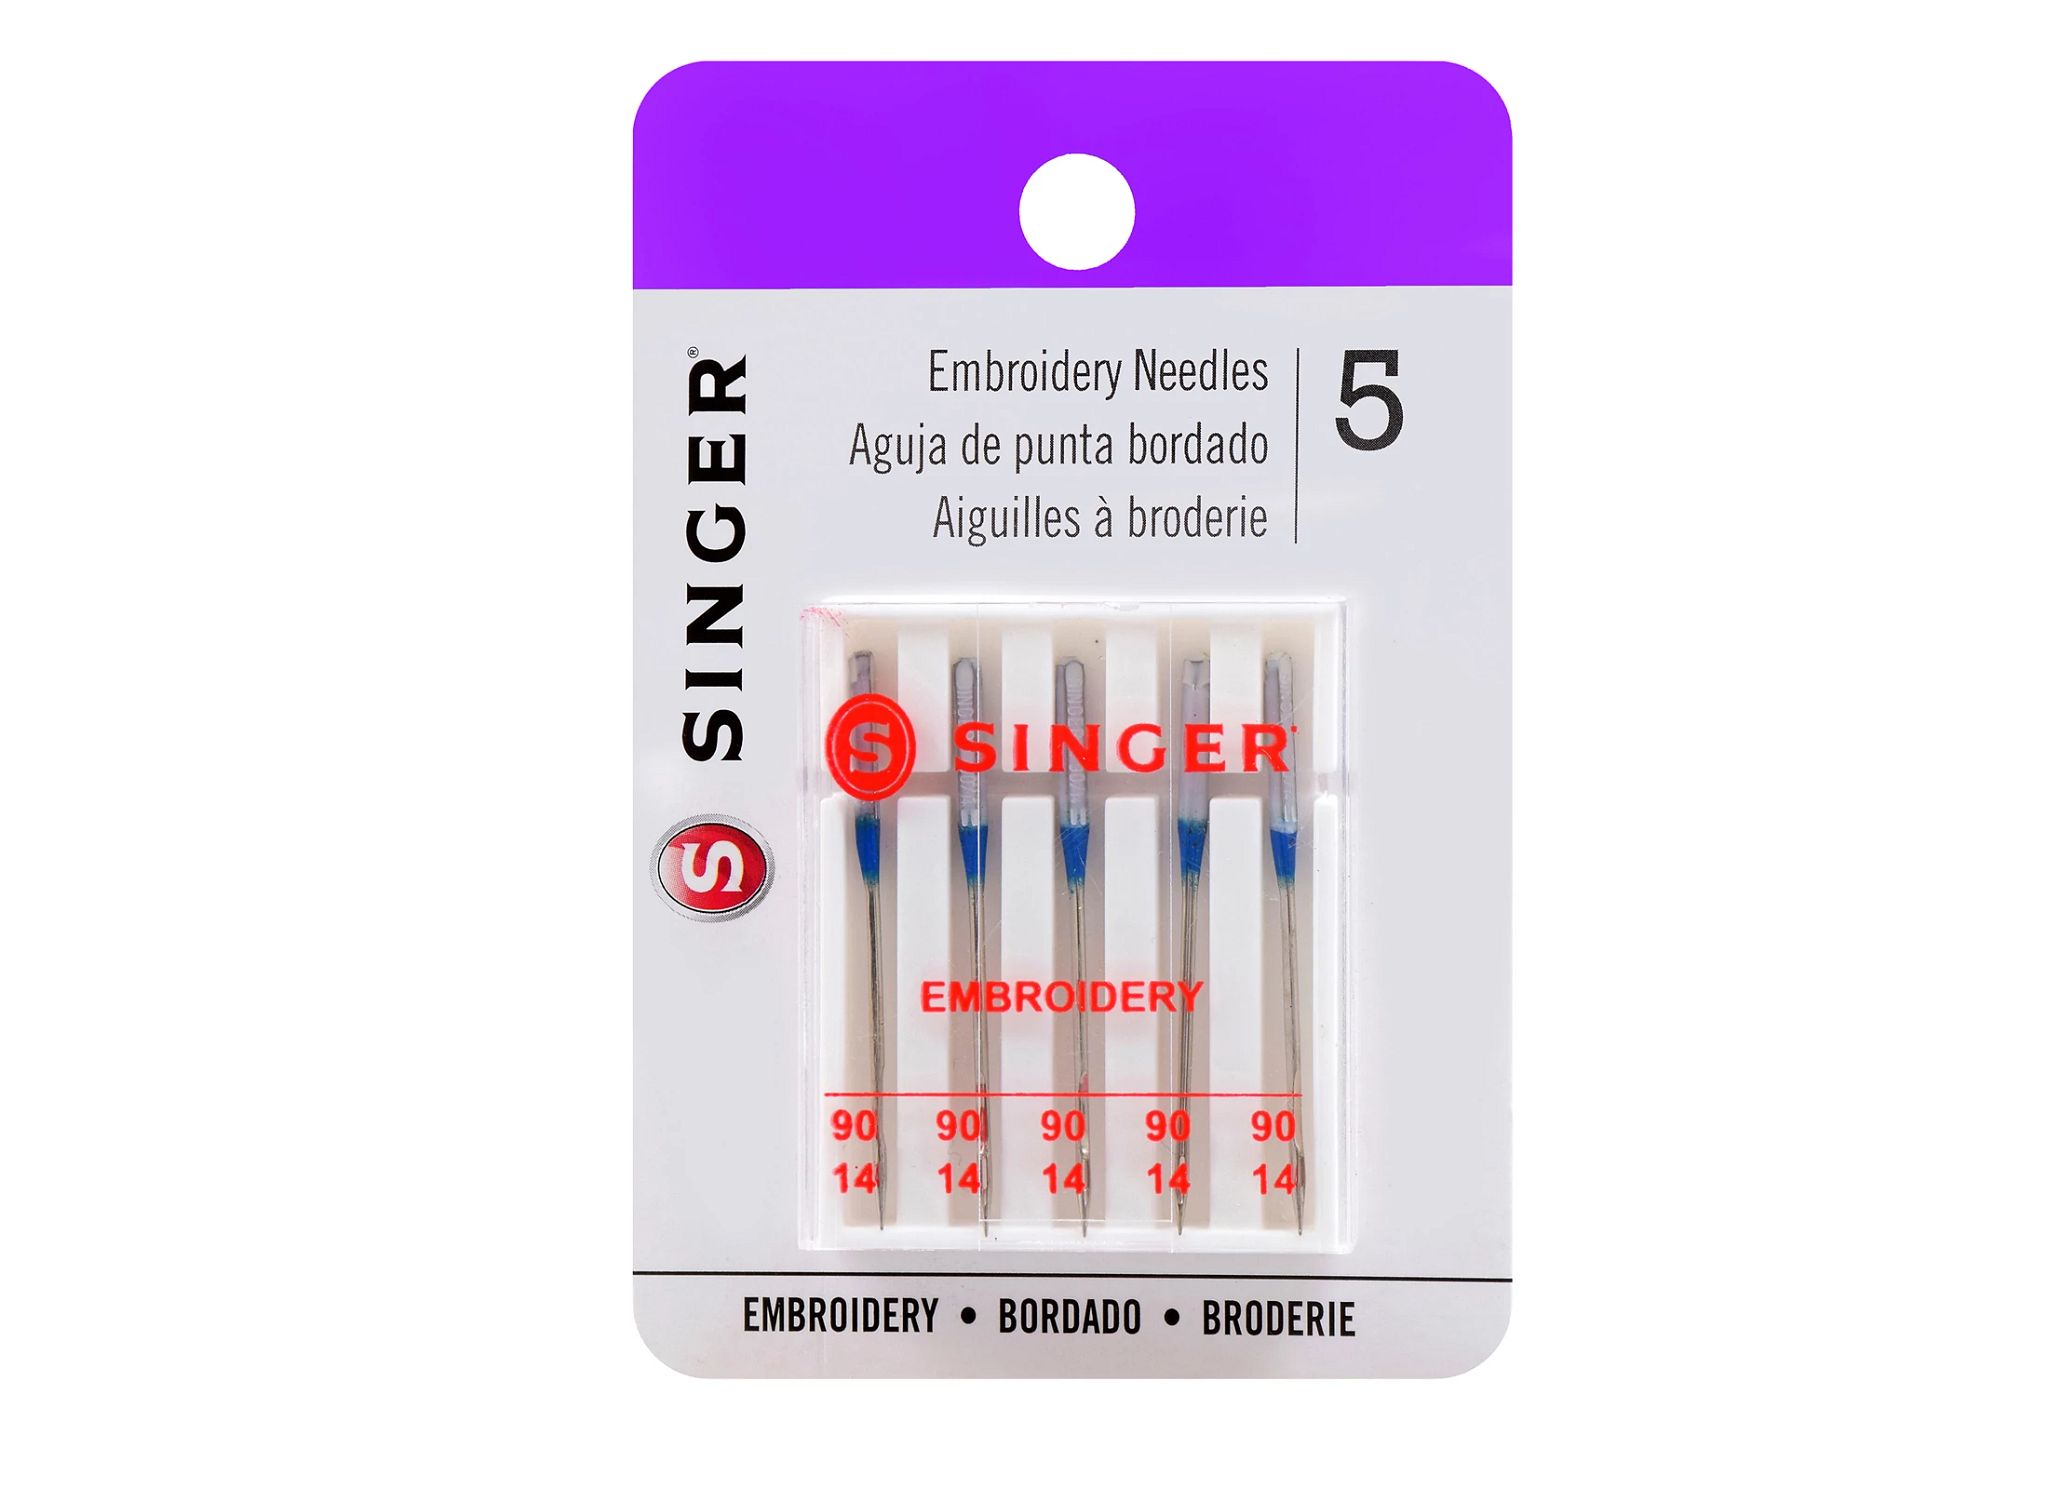 SINGER Embroidery Needles, Size 90/14